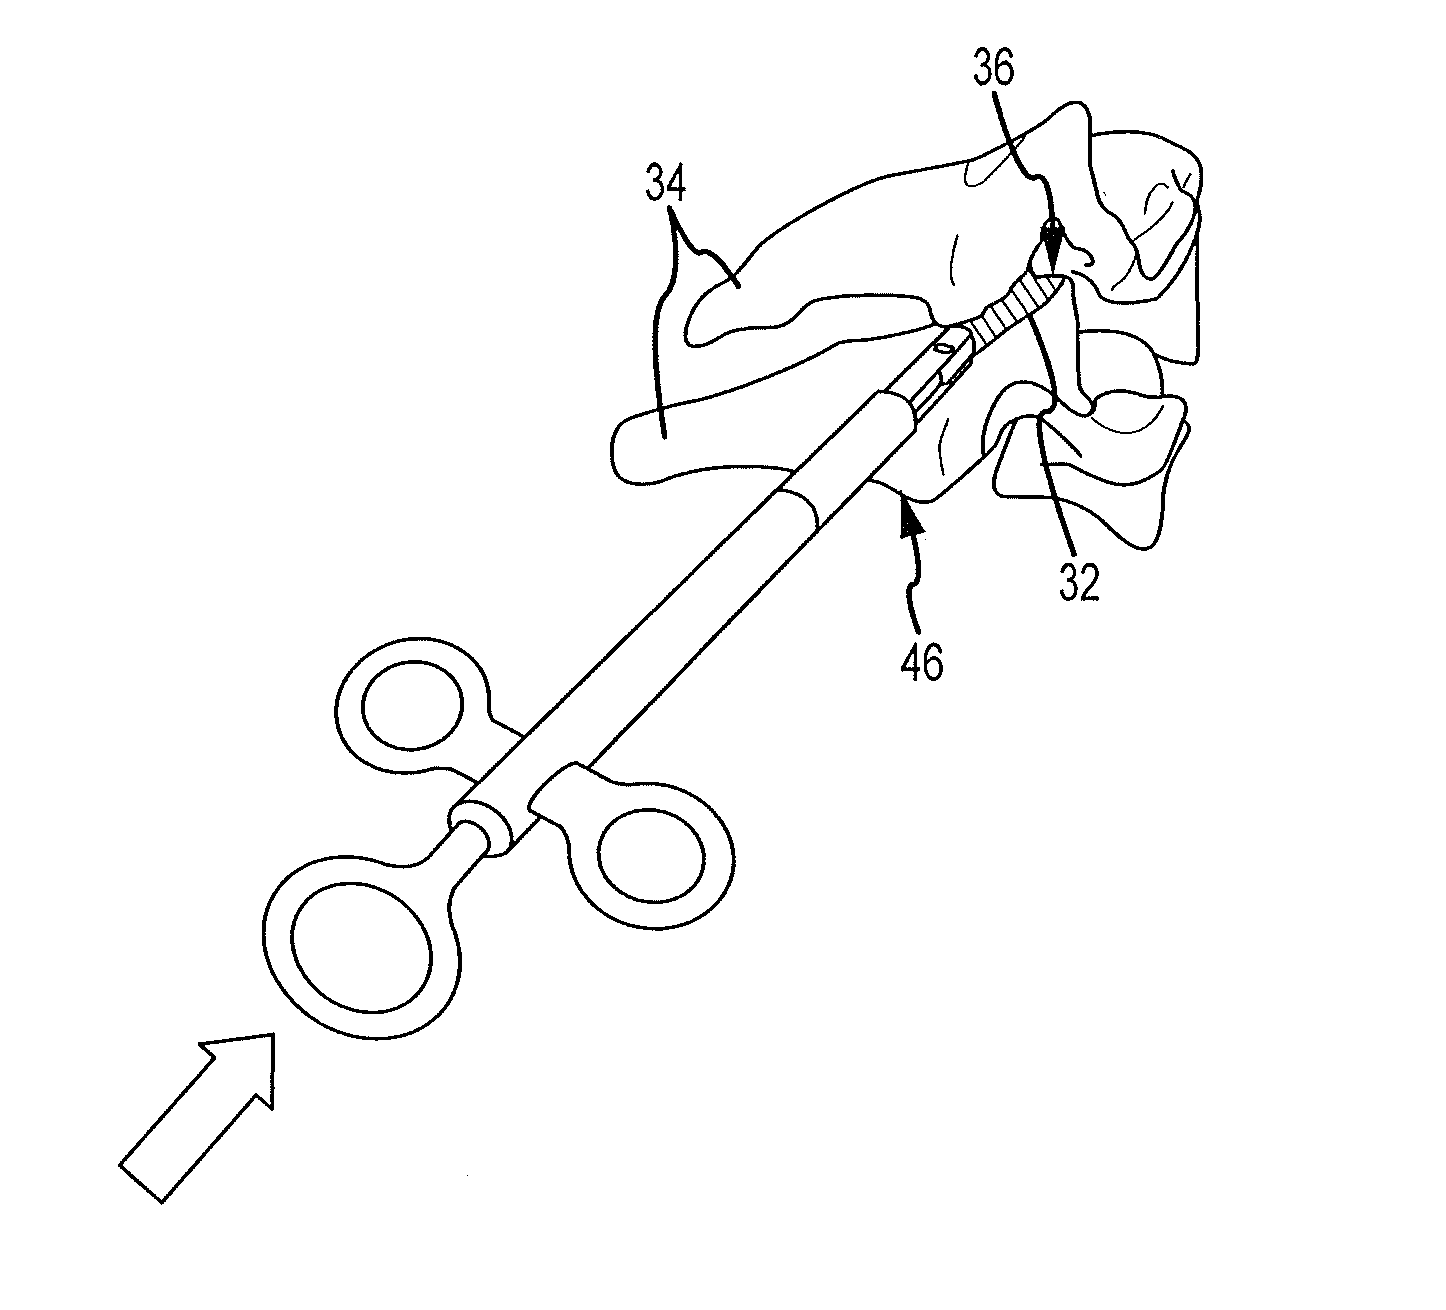 Cervical distraction/implant delivery device